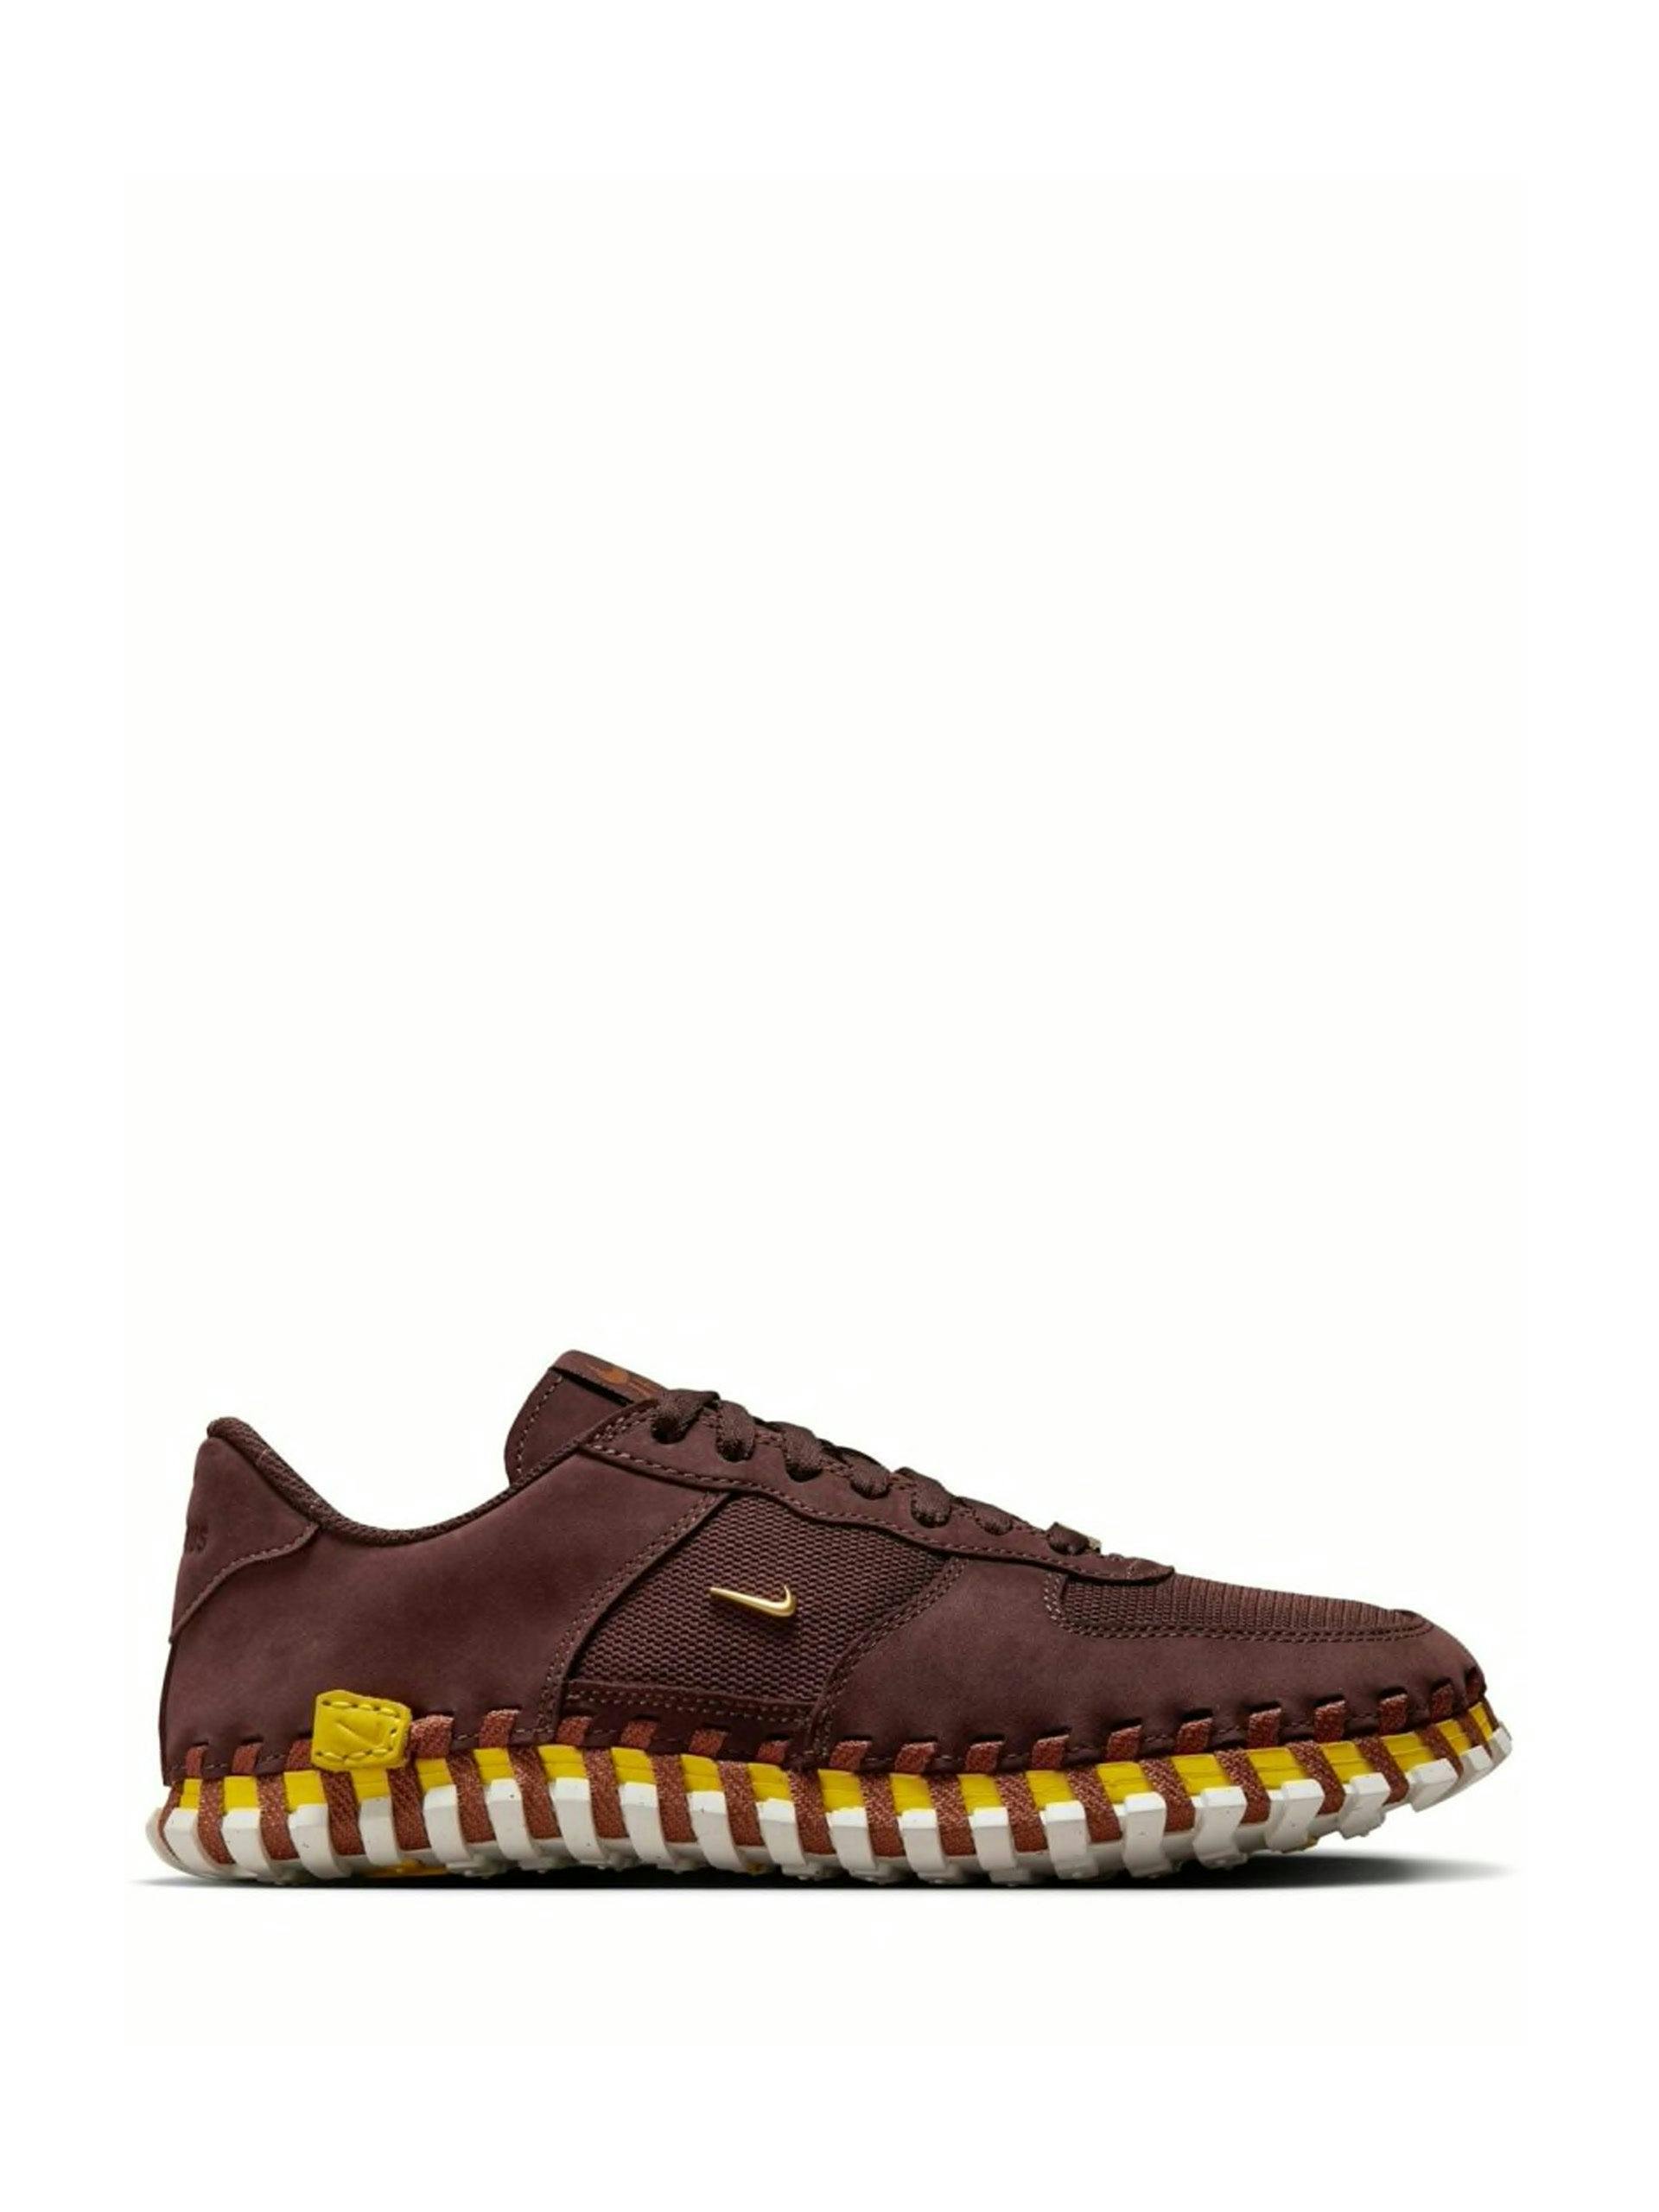 Jacquemus Force 1 Low LX SP sneakers